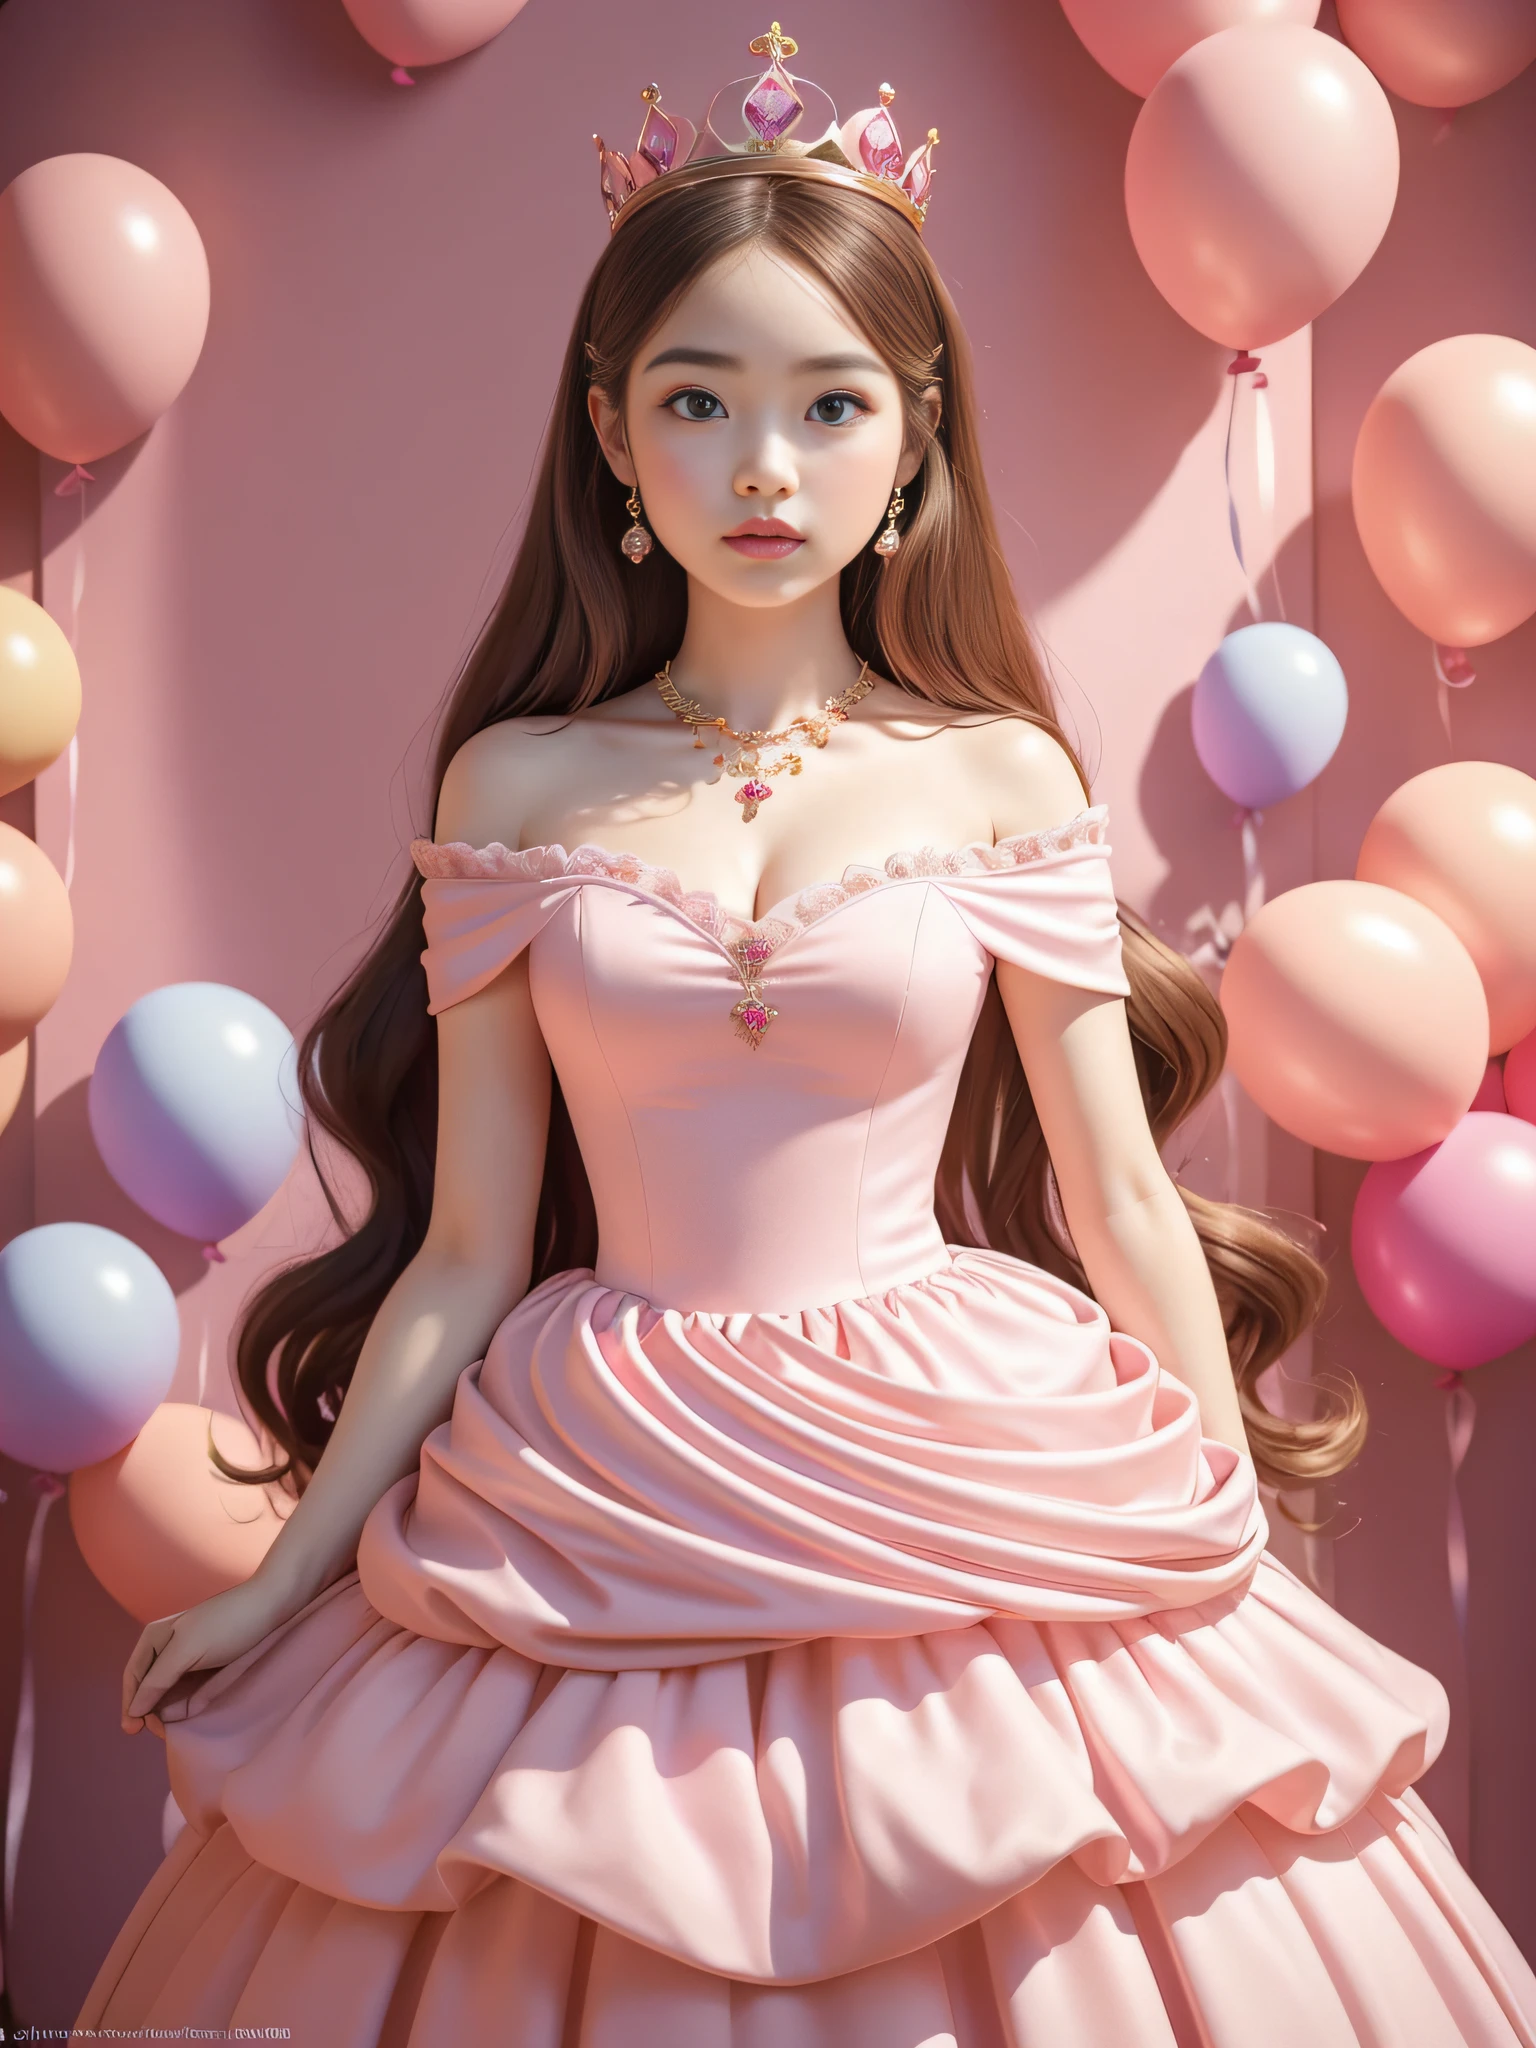 A Barbie princess wearing a lovely pink lightweight dress, wearing a beautiful crown, an indoor photography of a labyrinth of monumental, inflated pink balloons, an art installation by Martin Creed, ((Full body shot)), pink background, delicate face, white skin, delicate facial features, perfect facial features, delicate hair portrayal, delicate eyes portrayal, 8k picture quality, atmosphere sense, the highest quality, masterwork, extreme detail, high resolution, blurry foreground, foreshortening, high quality, Masterpiece, best quality